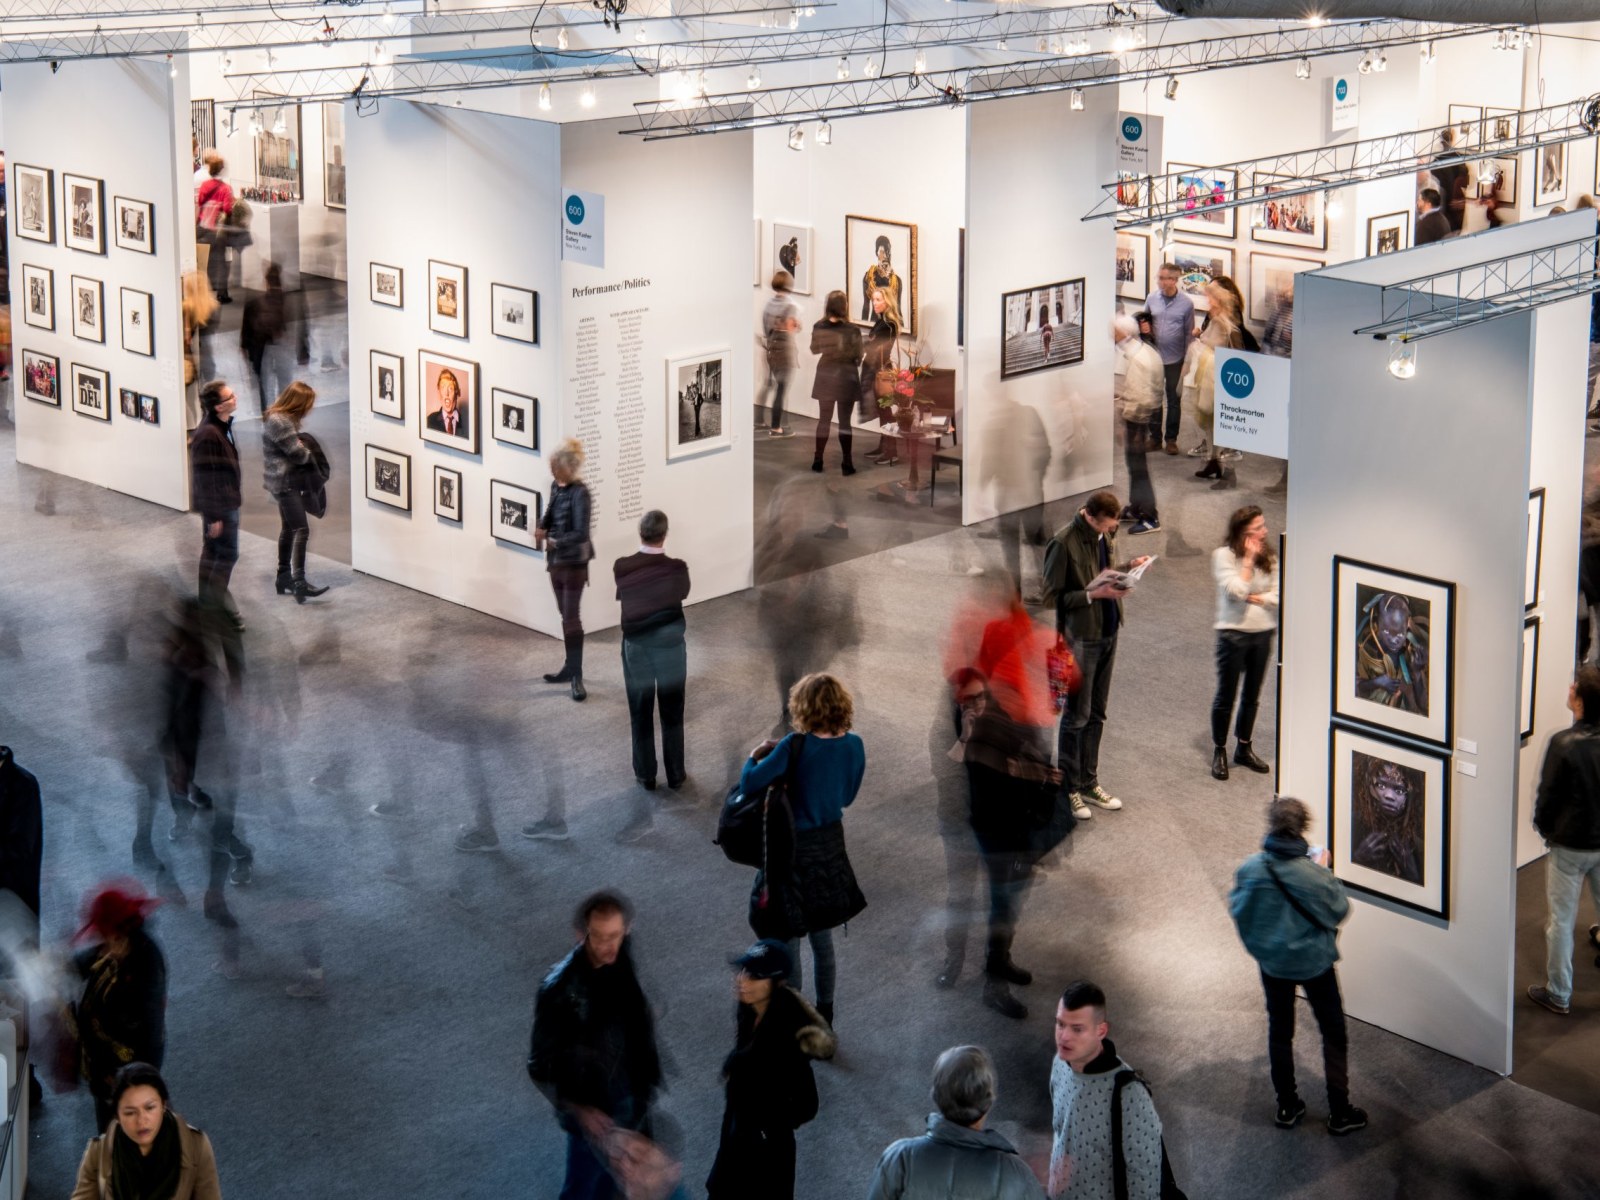 A time-lapse photo of people walking through the aisles of The Photography Show.